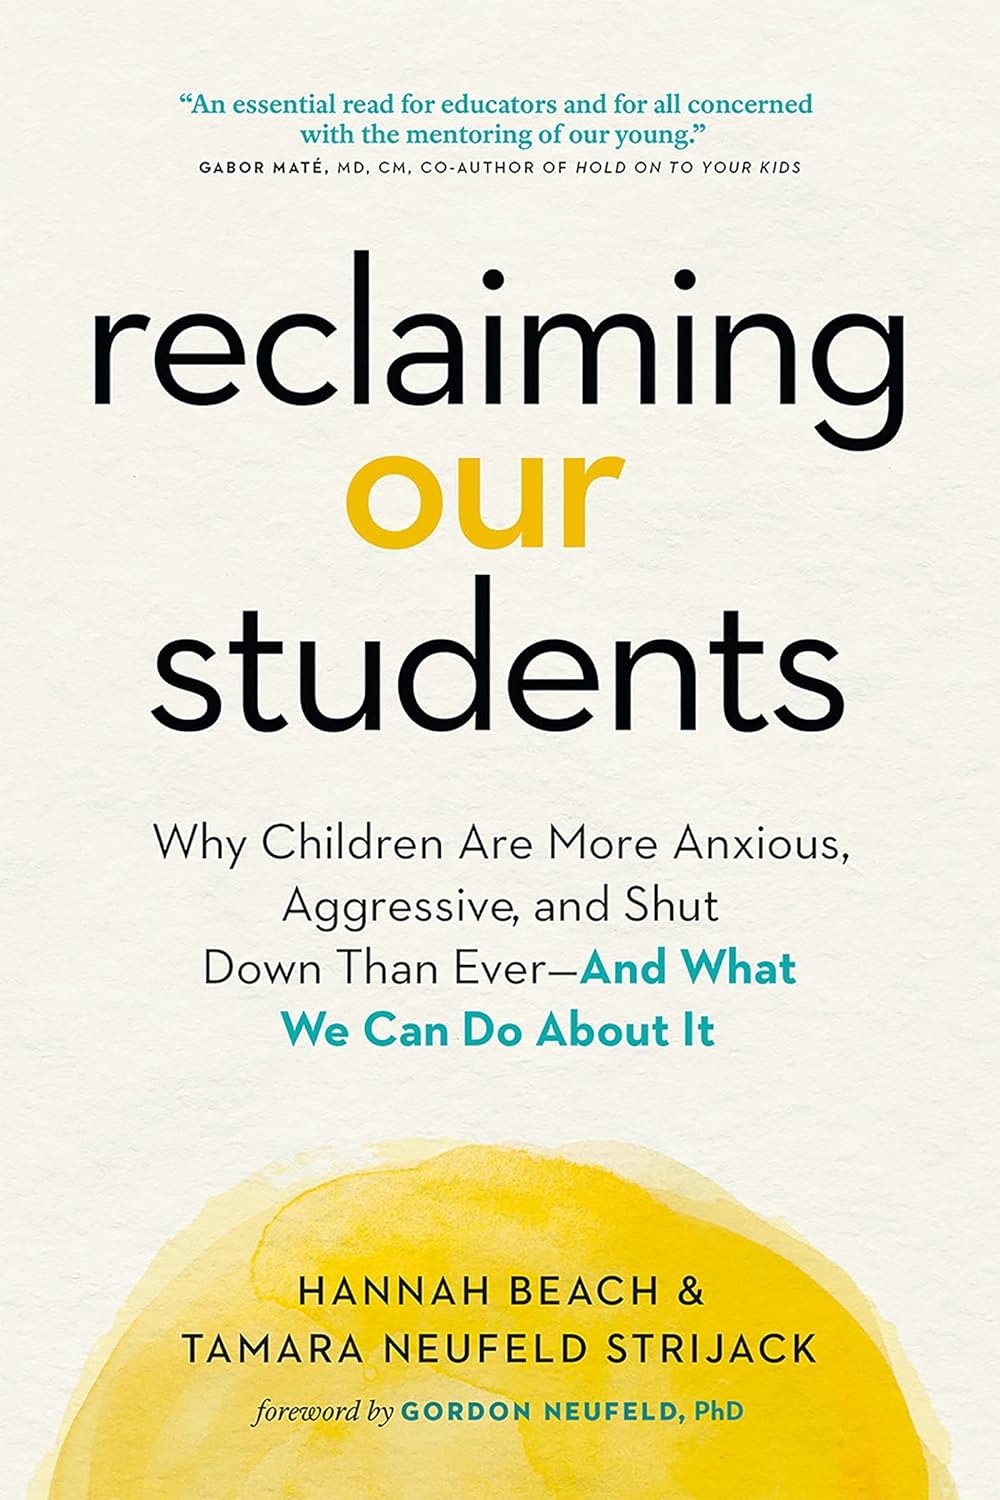 Reclaiming Our Students: Why Children Are More Anxious, Aggressive, and Shut Down Than Ever ― And What We Can Do About It by Hannah Beach and Tamara Neufeld Strijack